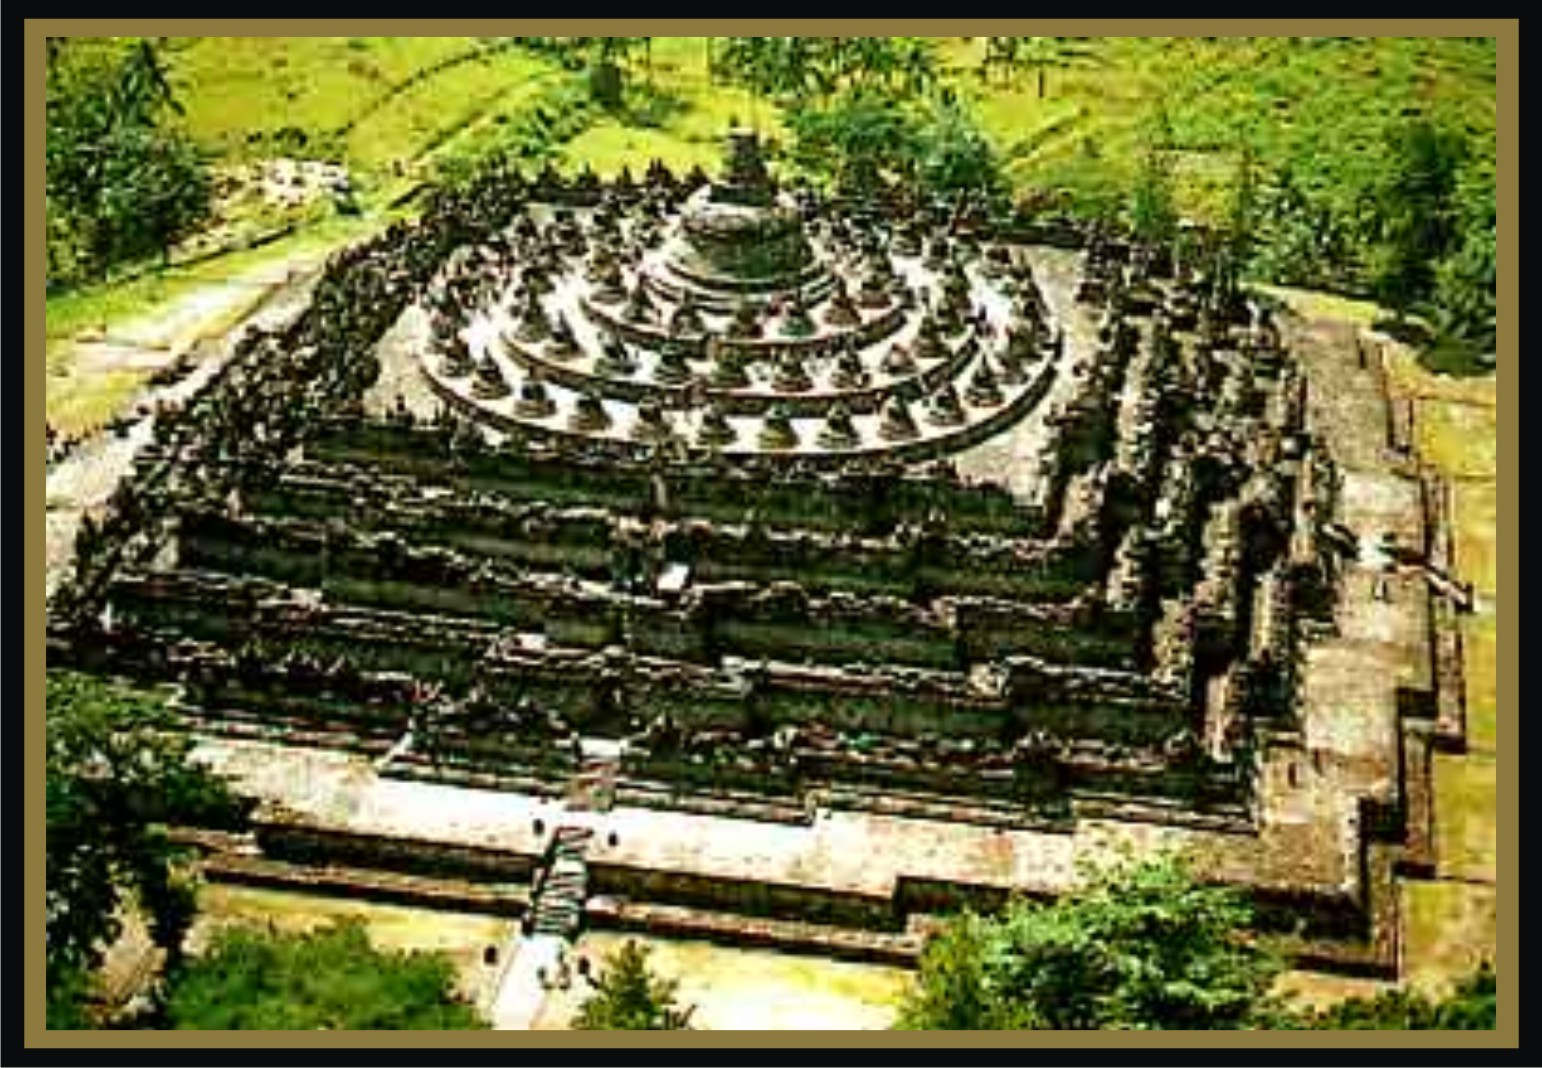 Borobudur The Greatest Temple In The World - Indonesia Tourism Guide